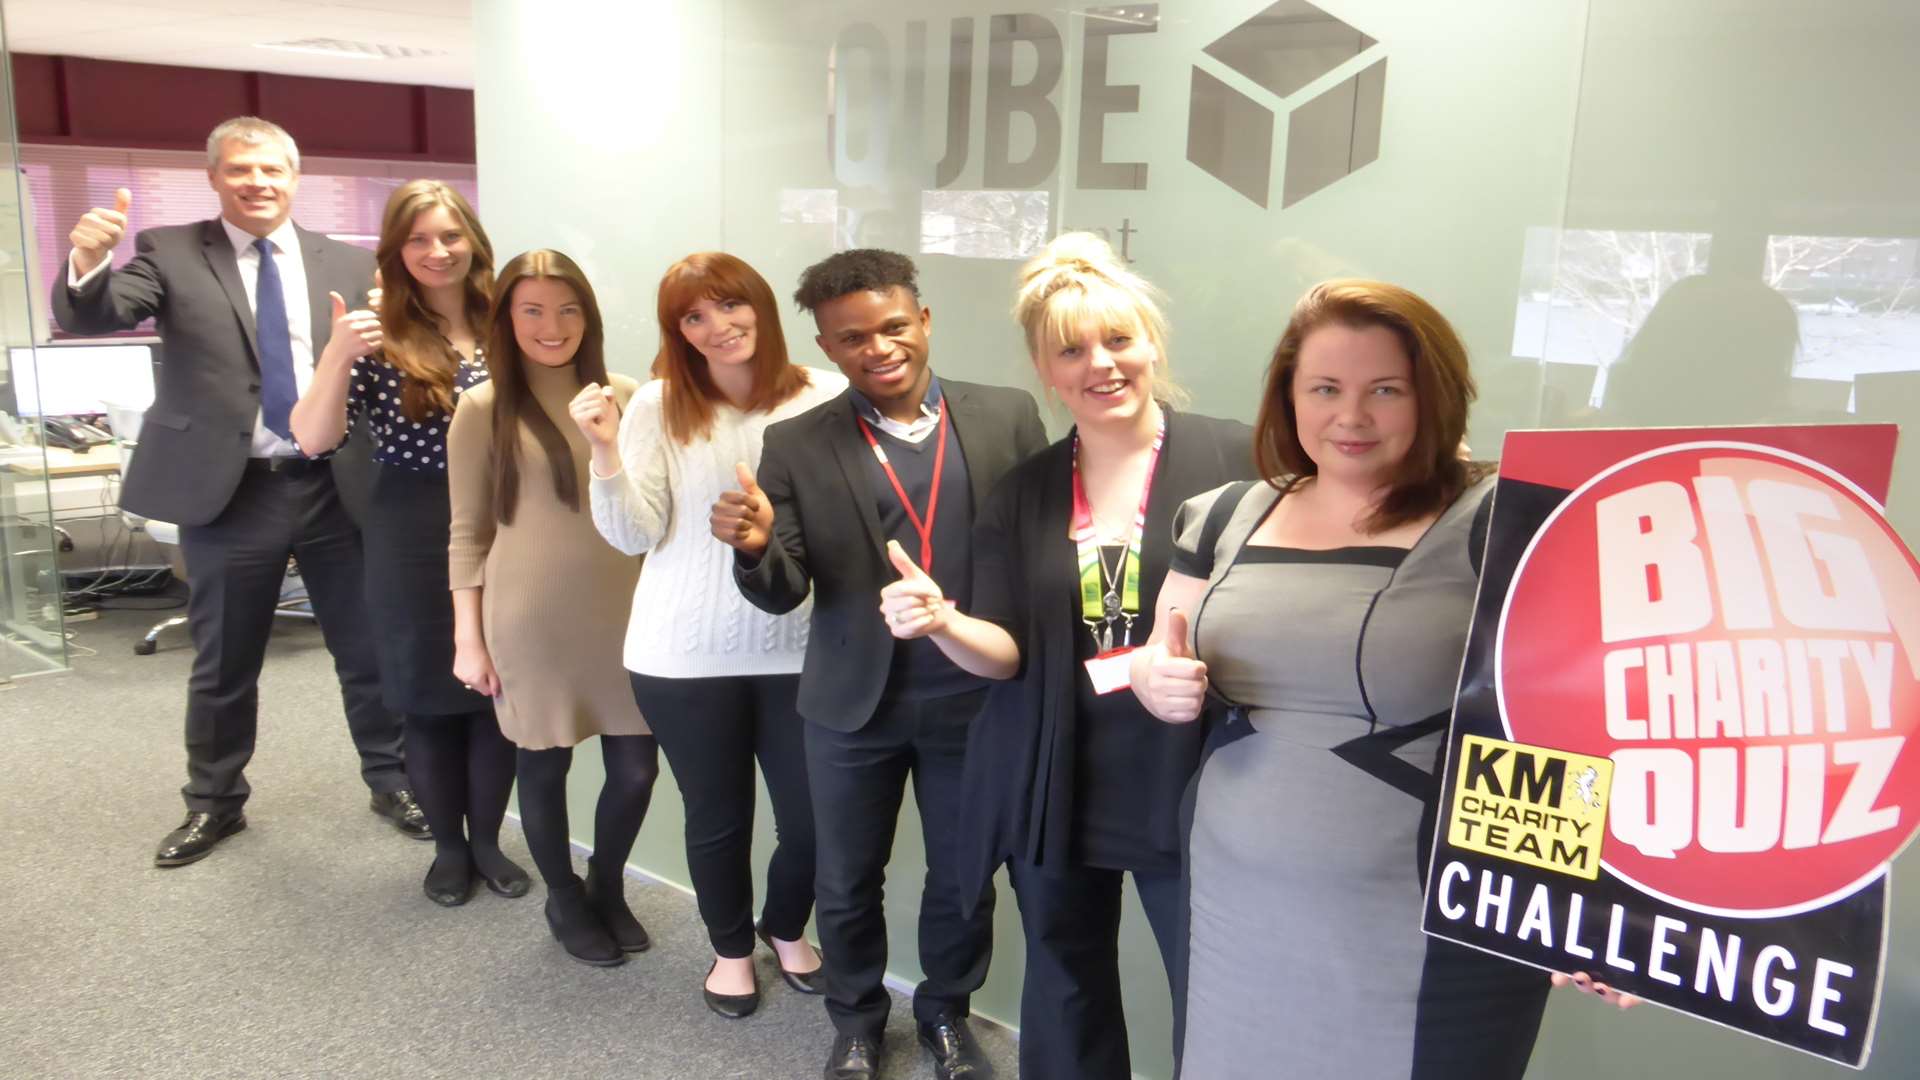 Director of Qube Recruitment Natalie Winter and team celebrate the company's support of the Medway Big Charity Quiz now open for booking.